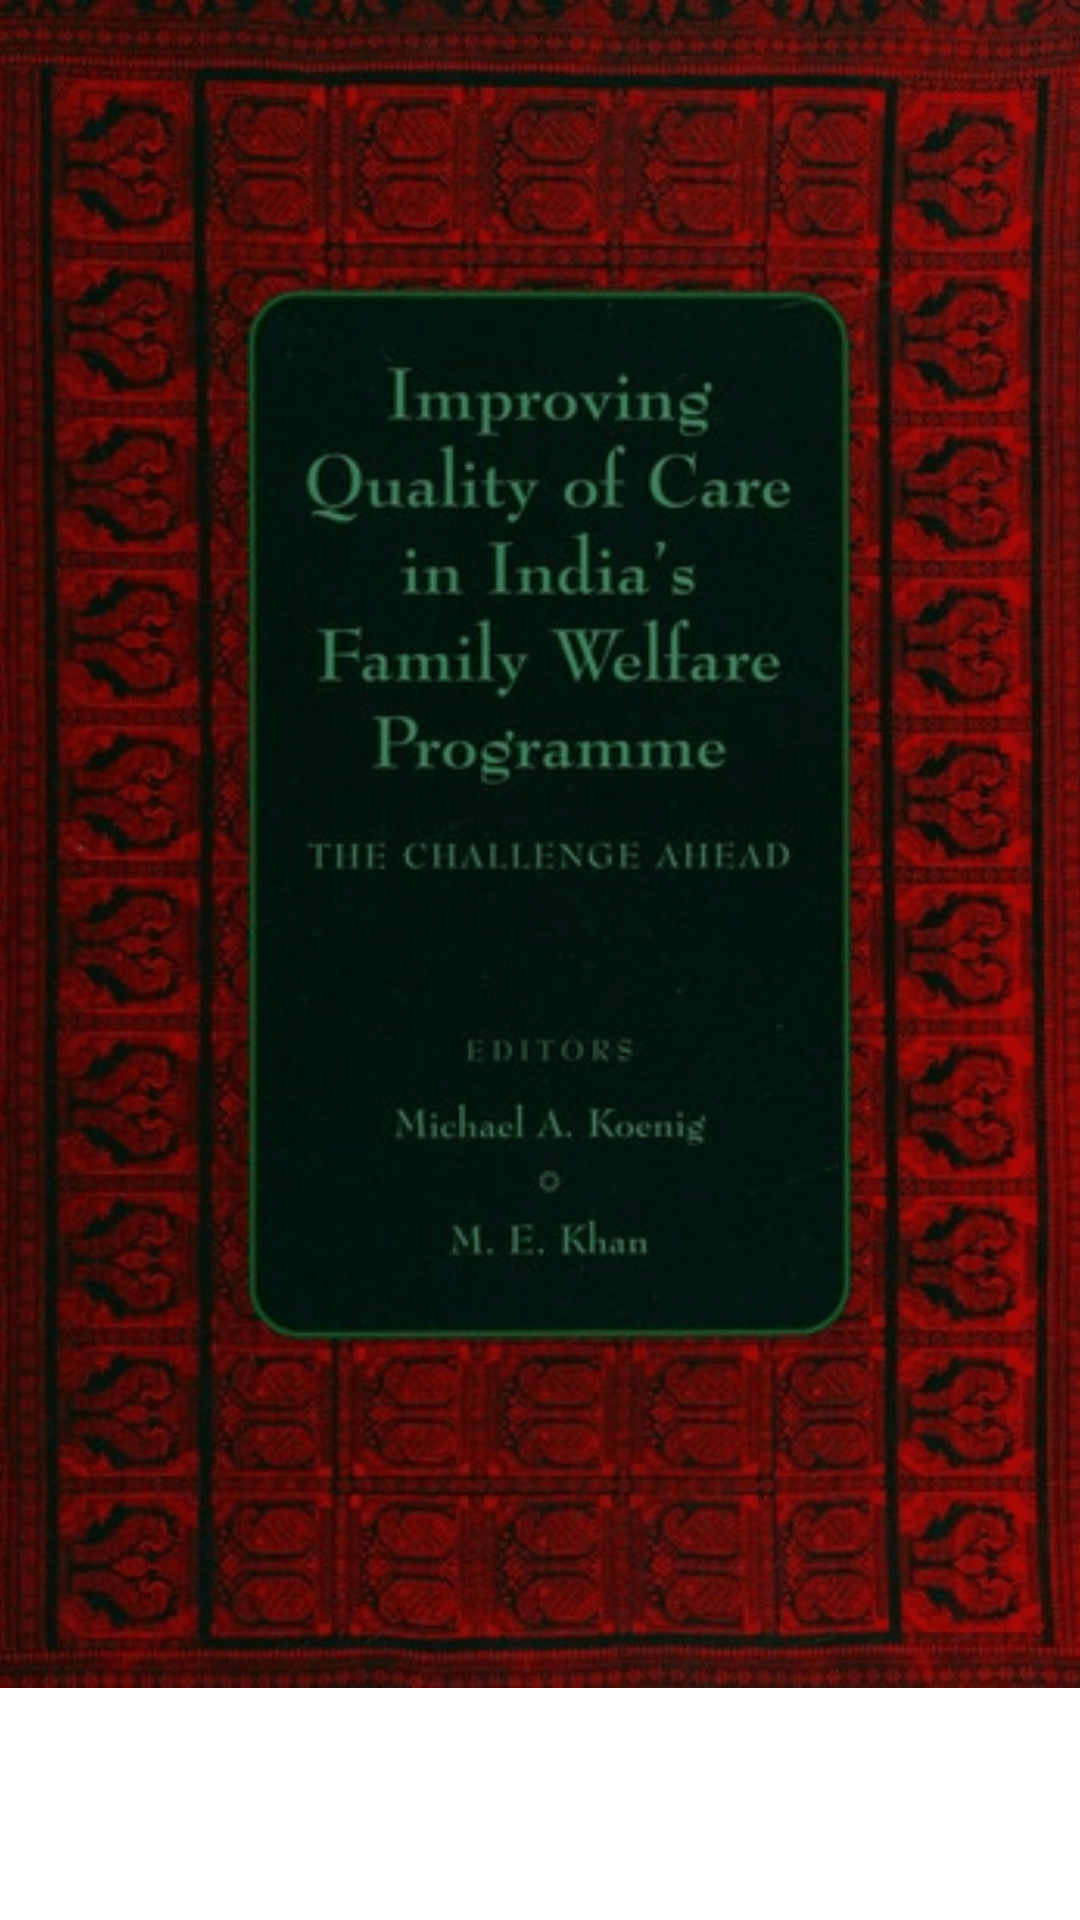 Improving Quality of Care in India's Family Welfare Programme